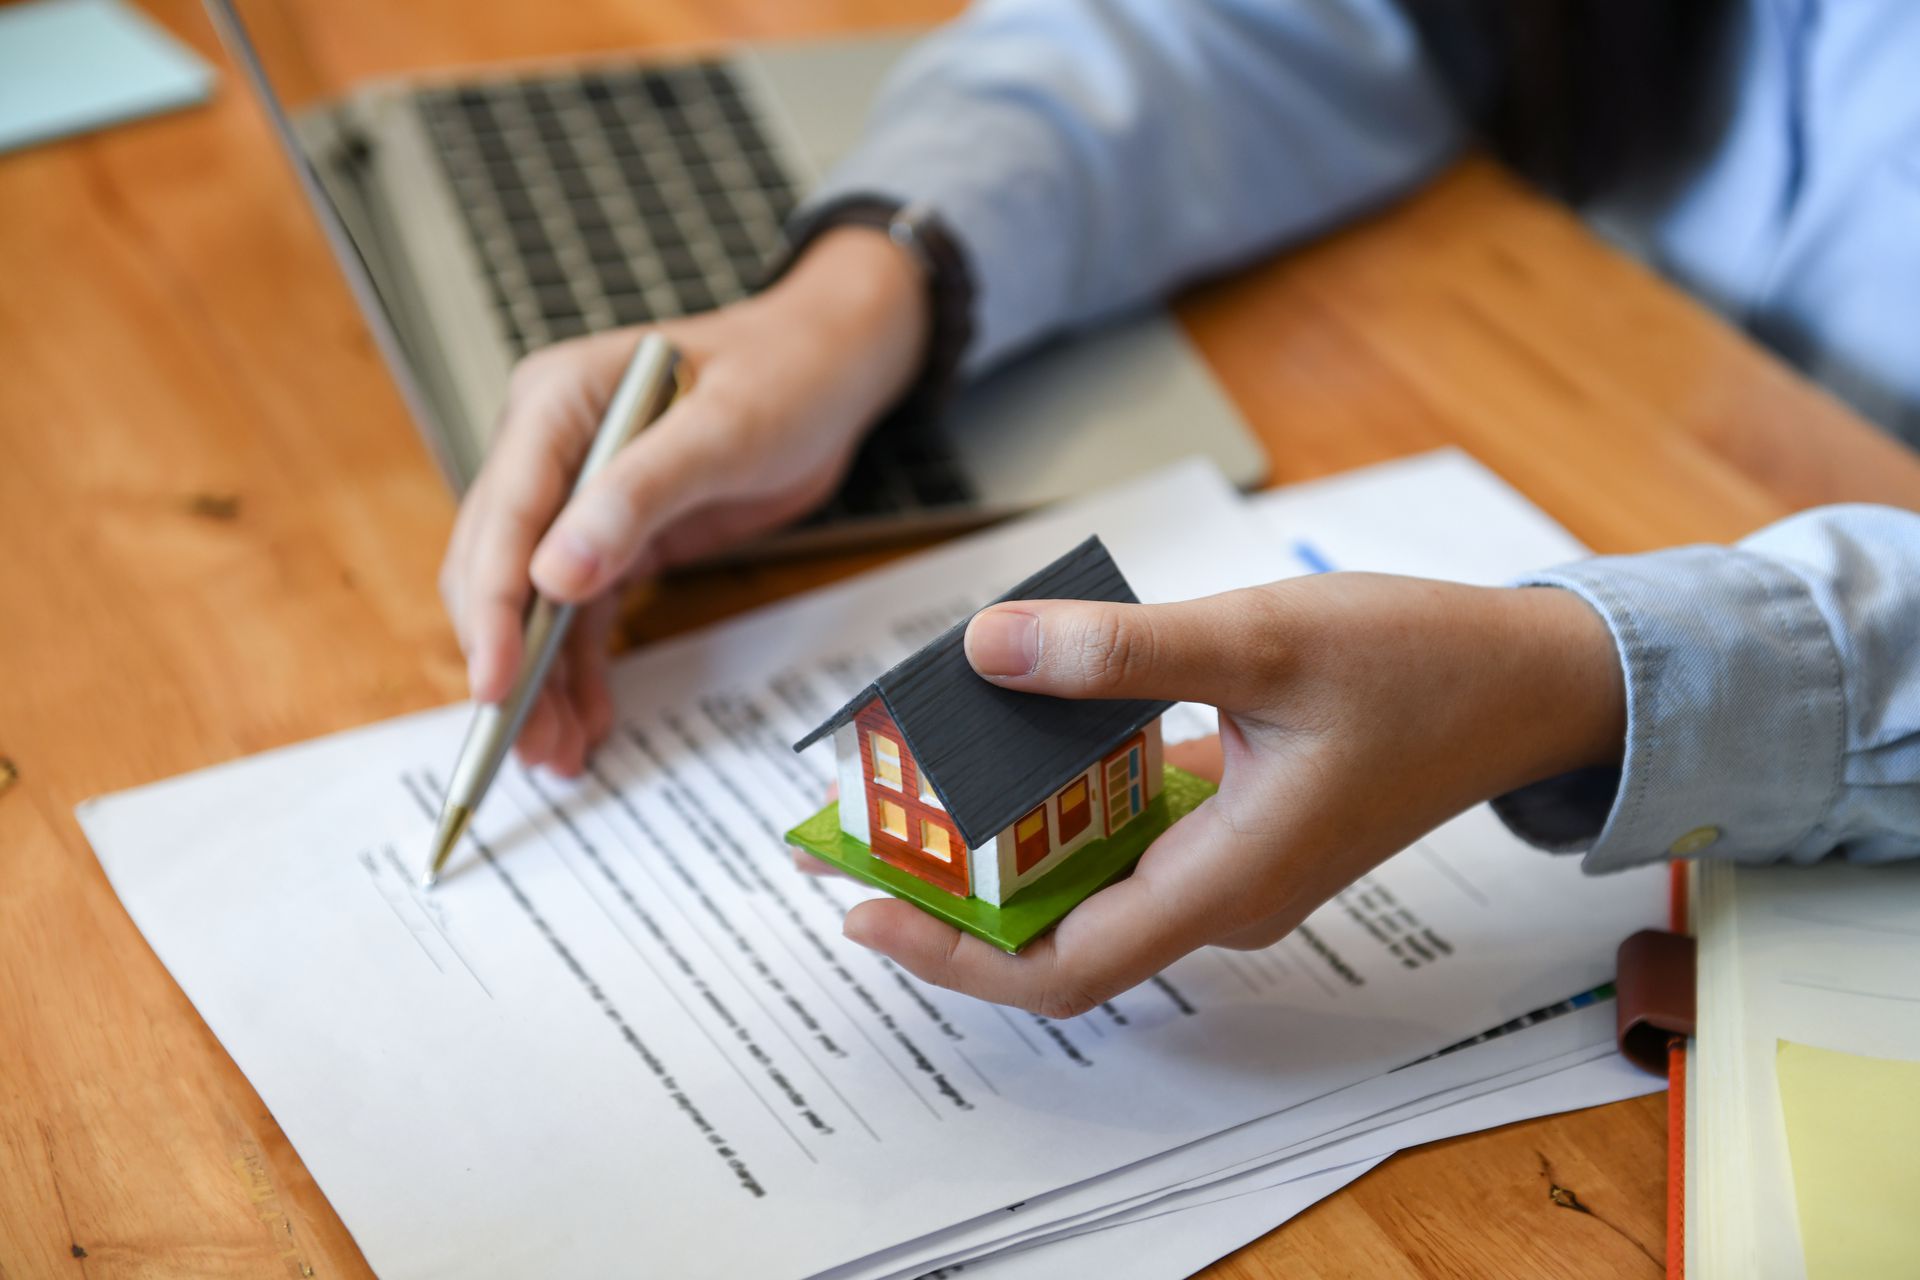 The home loan approval process